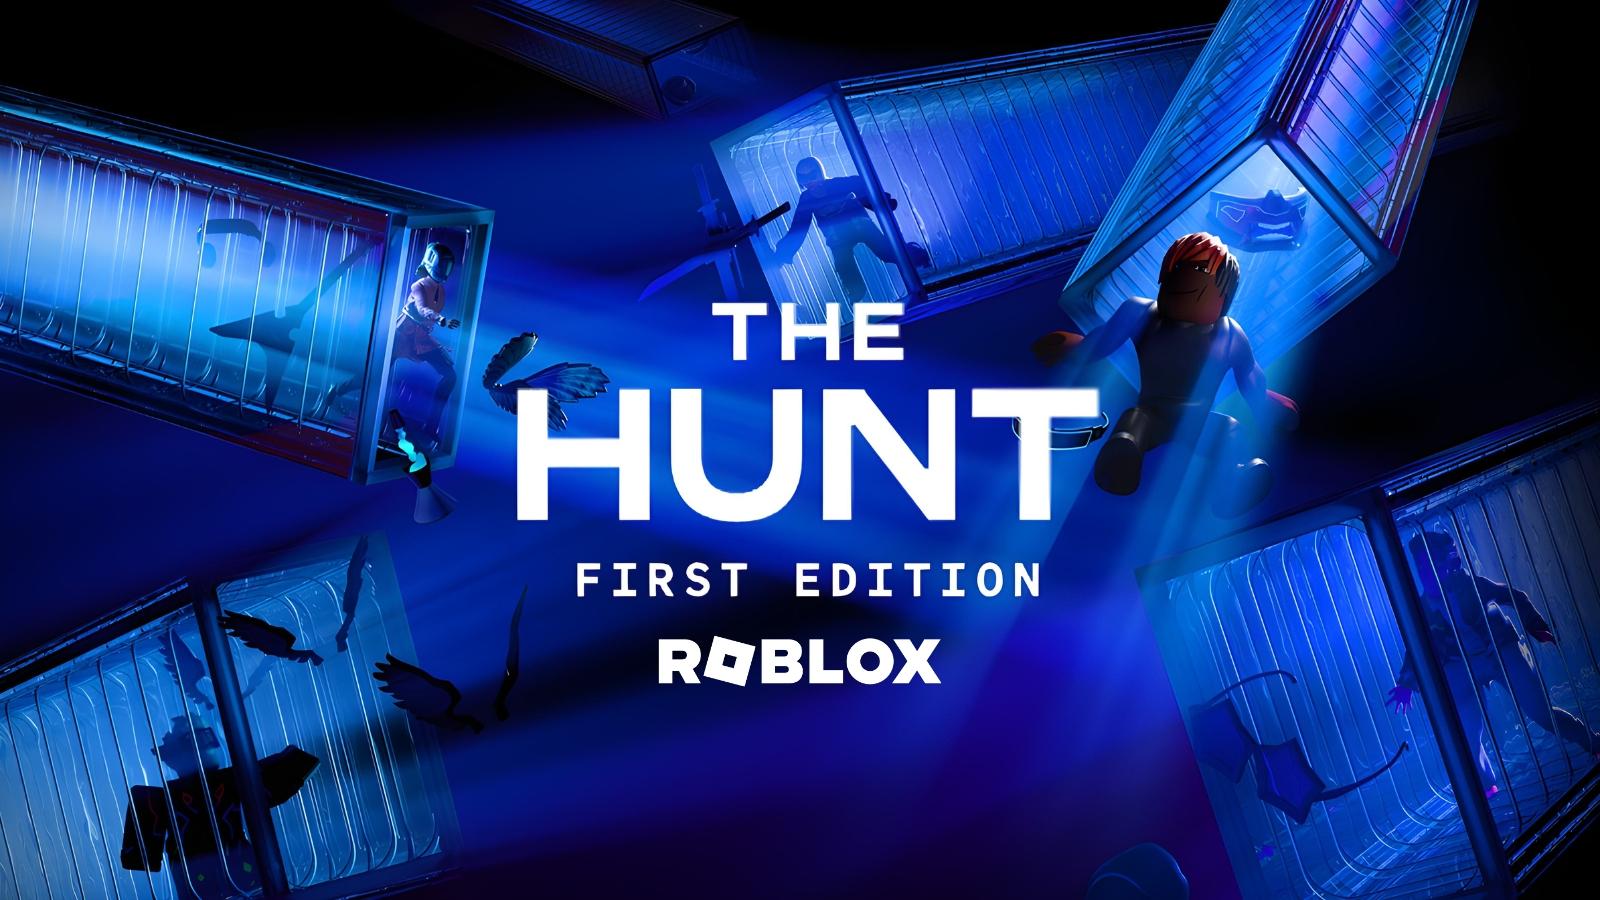 Roblox The Hunt event cover